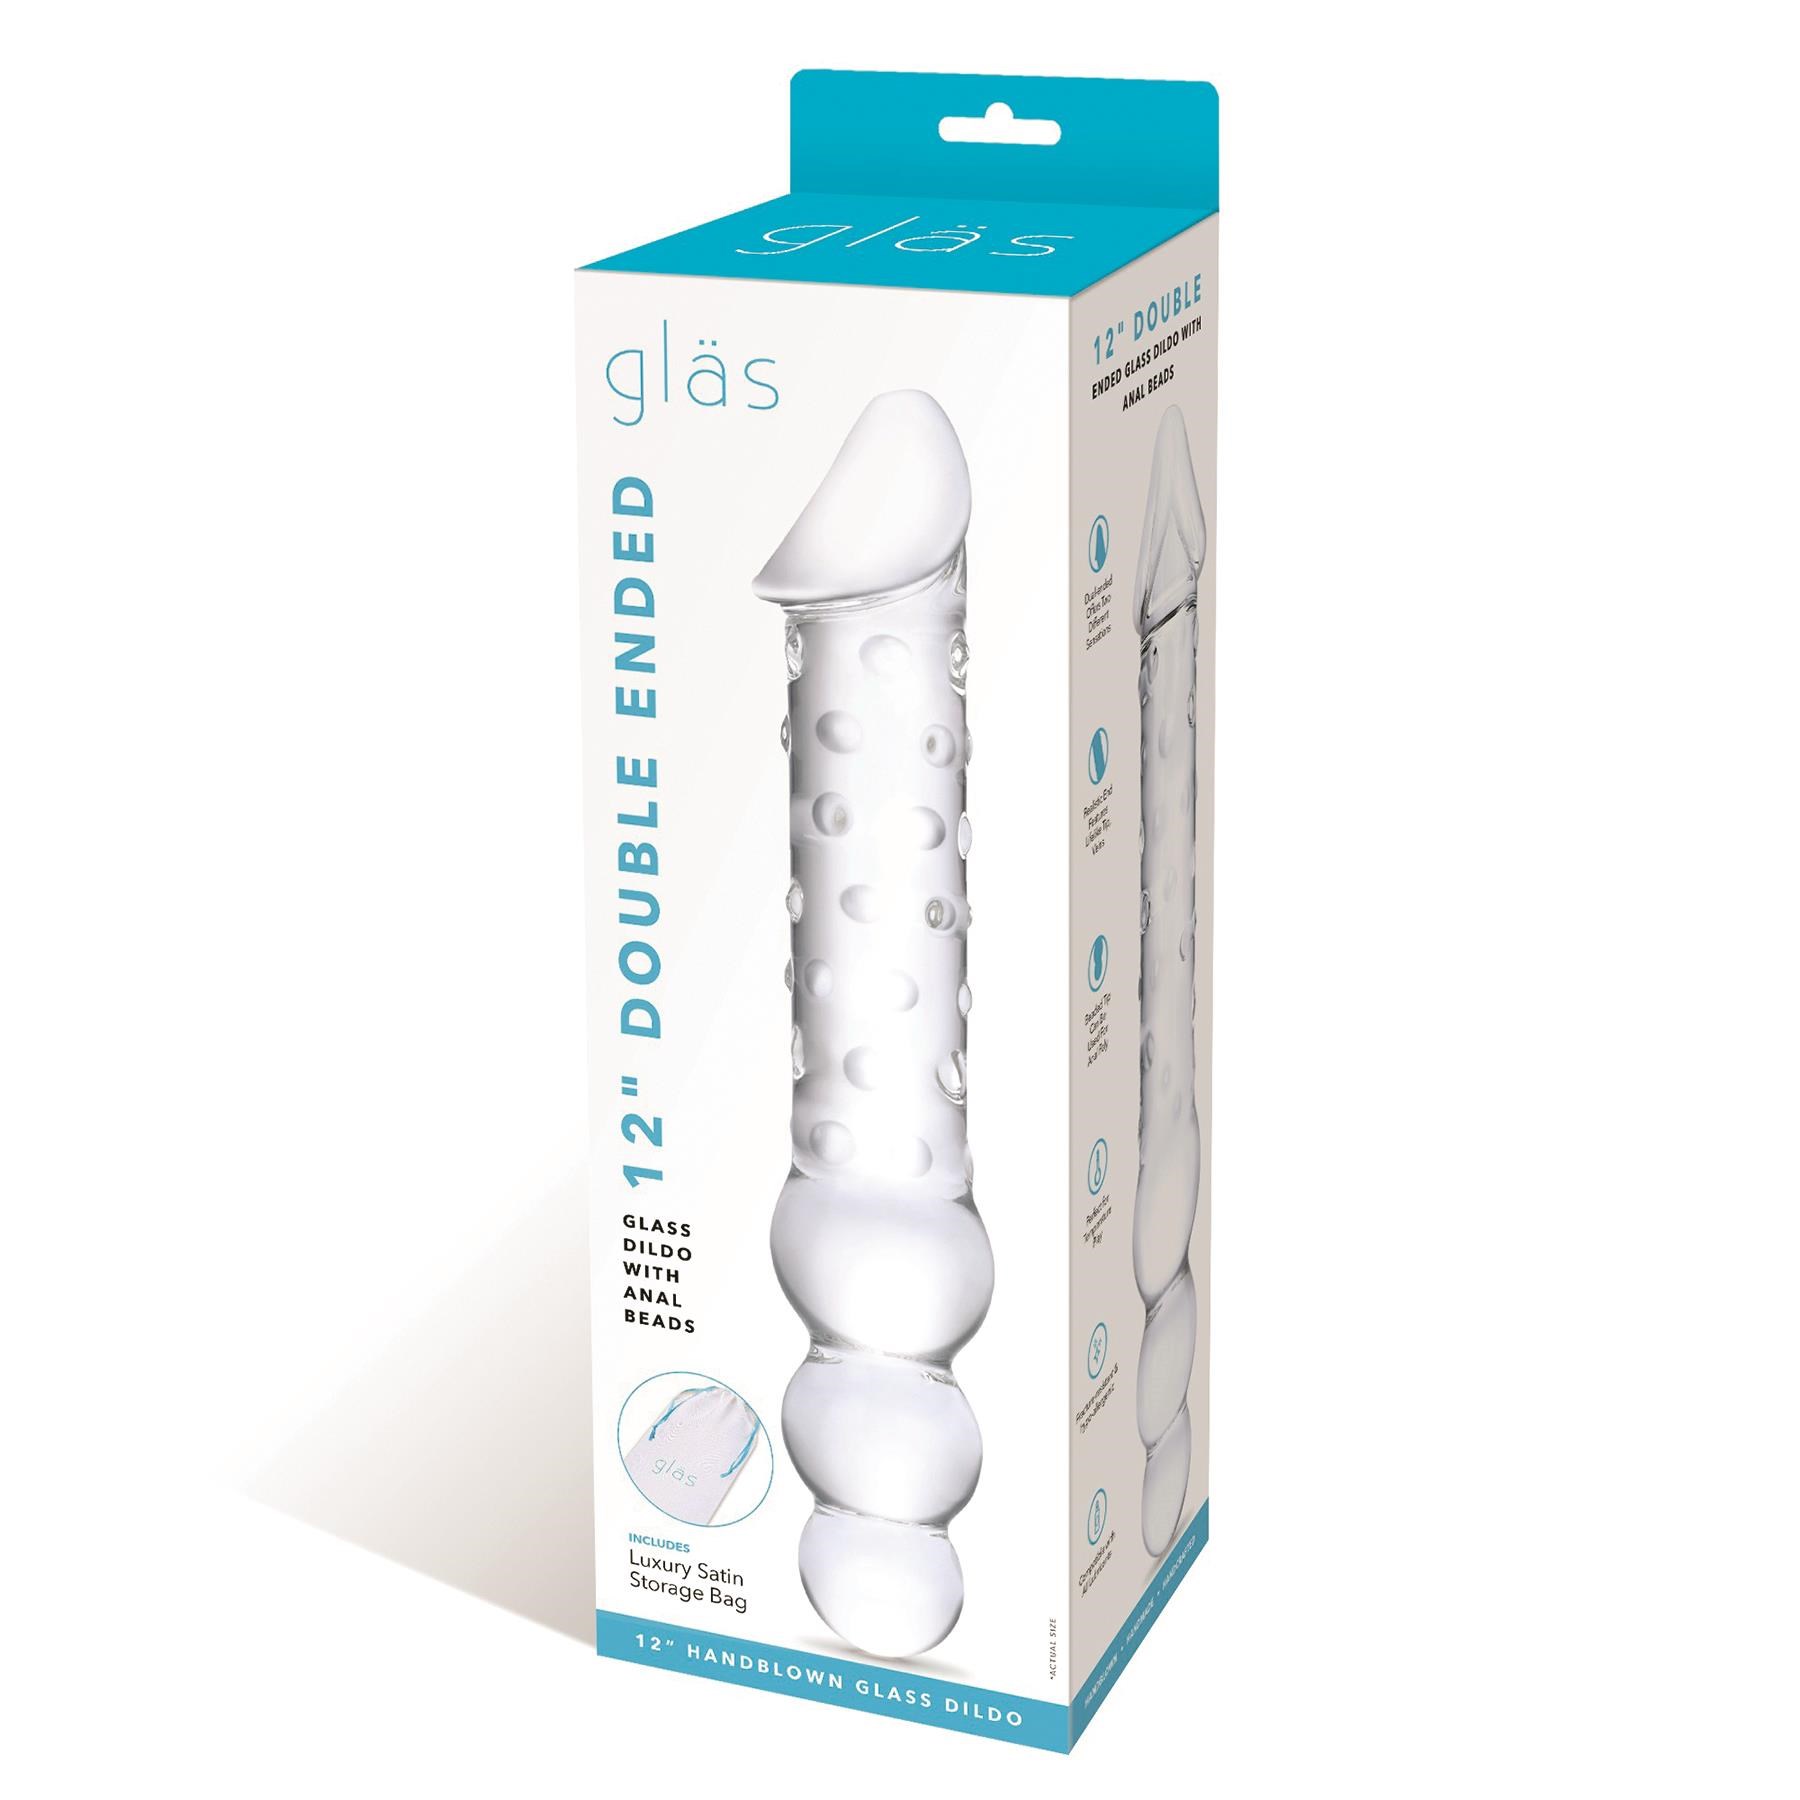 Glas 12 Inch Double Ended Glass Dildo - Packaging Shot